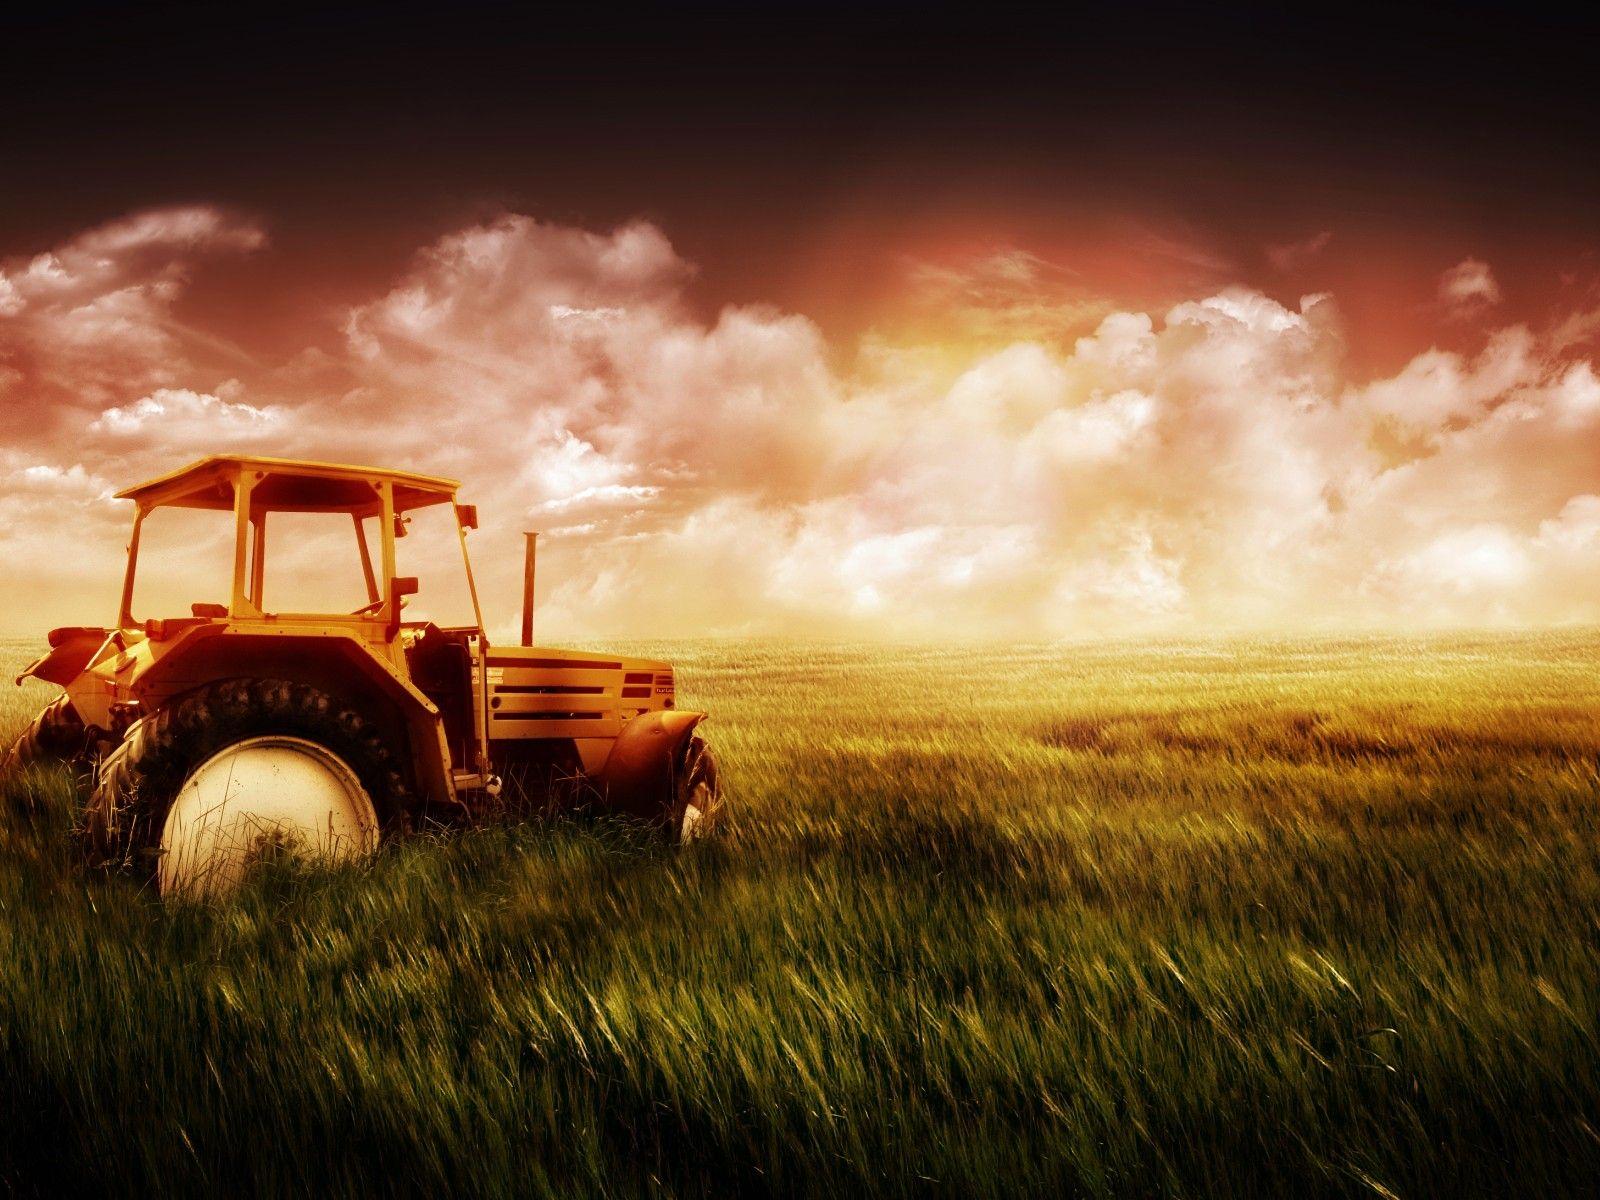 OLD FARM WALLPAPERS. OLD FARM STOCK PHOTOS. Field wallpaper